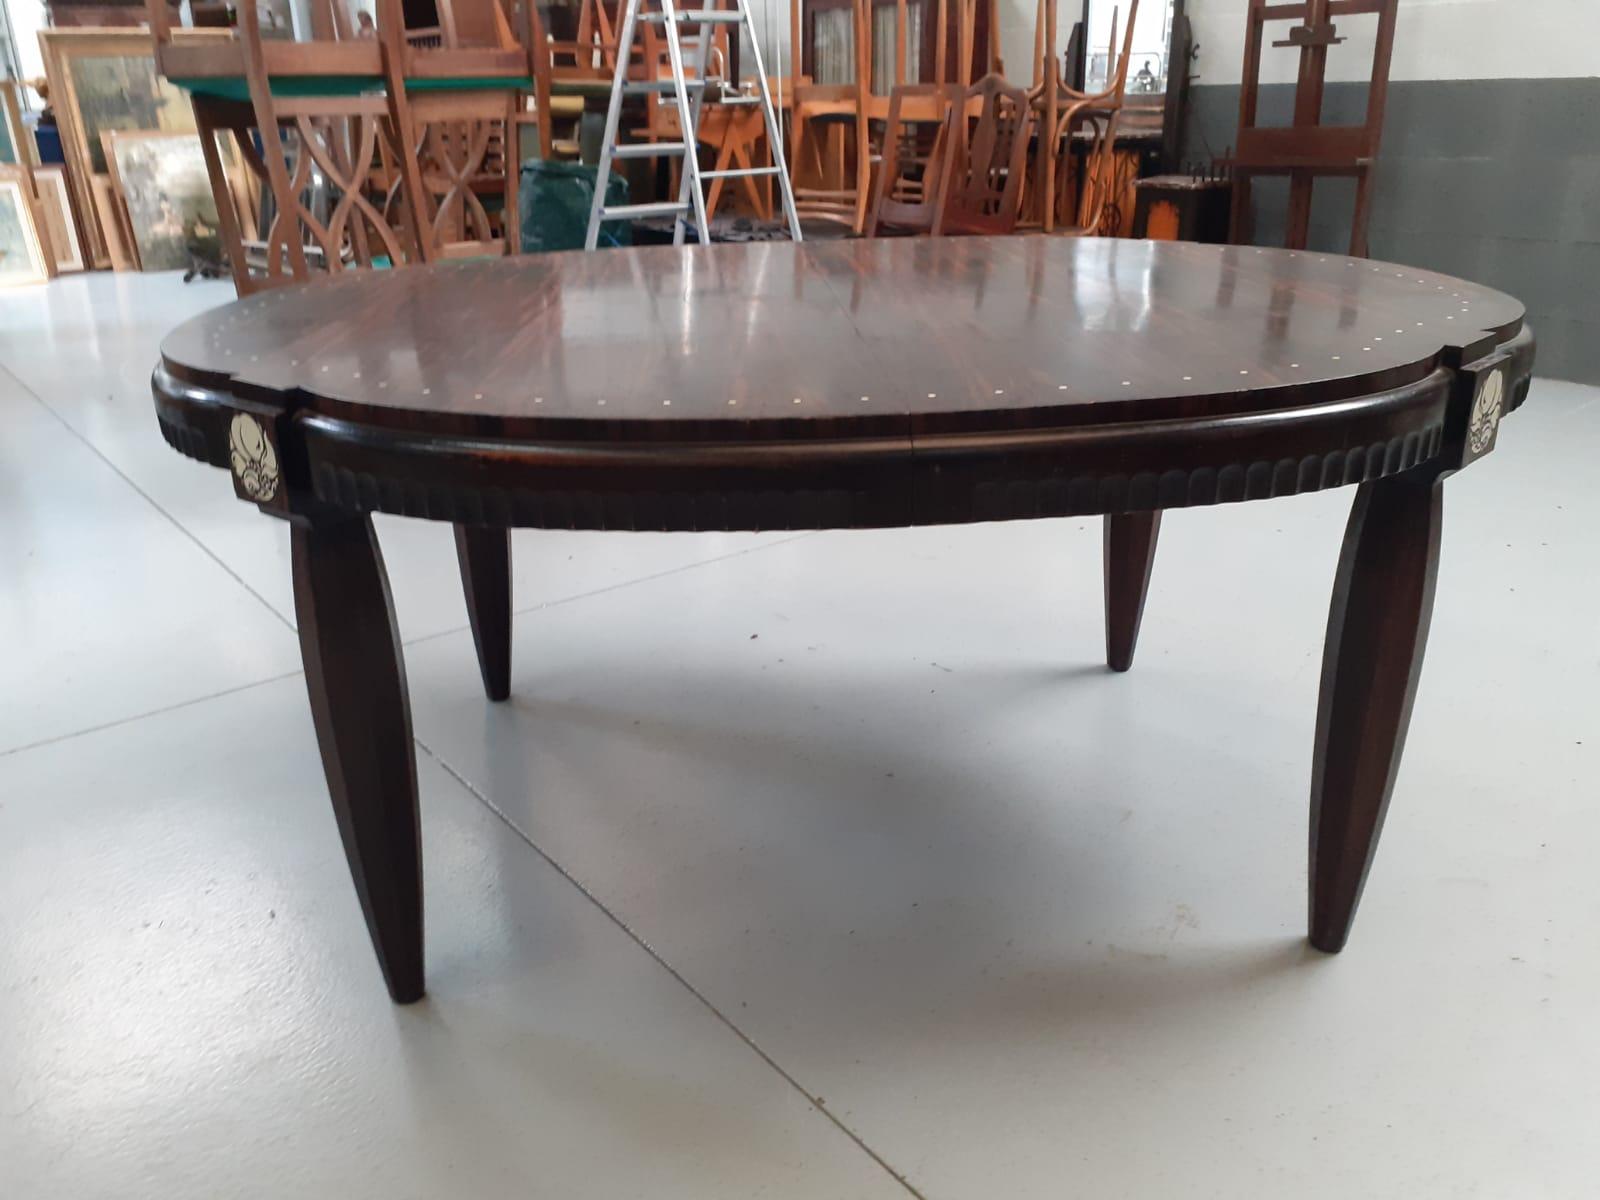 Rare Large Art Deco Table in Macassar Ebony and Ivory, circa 1925 For Sale 6